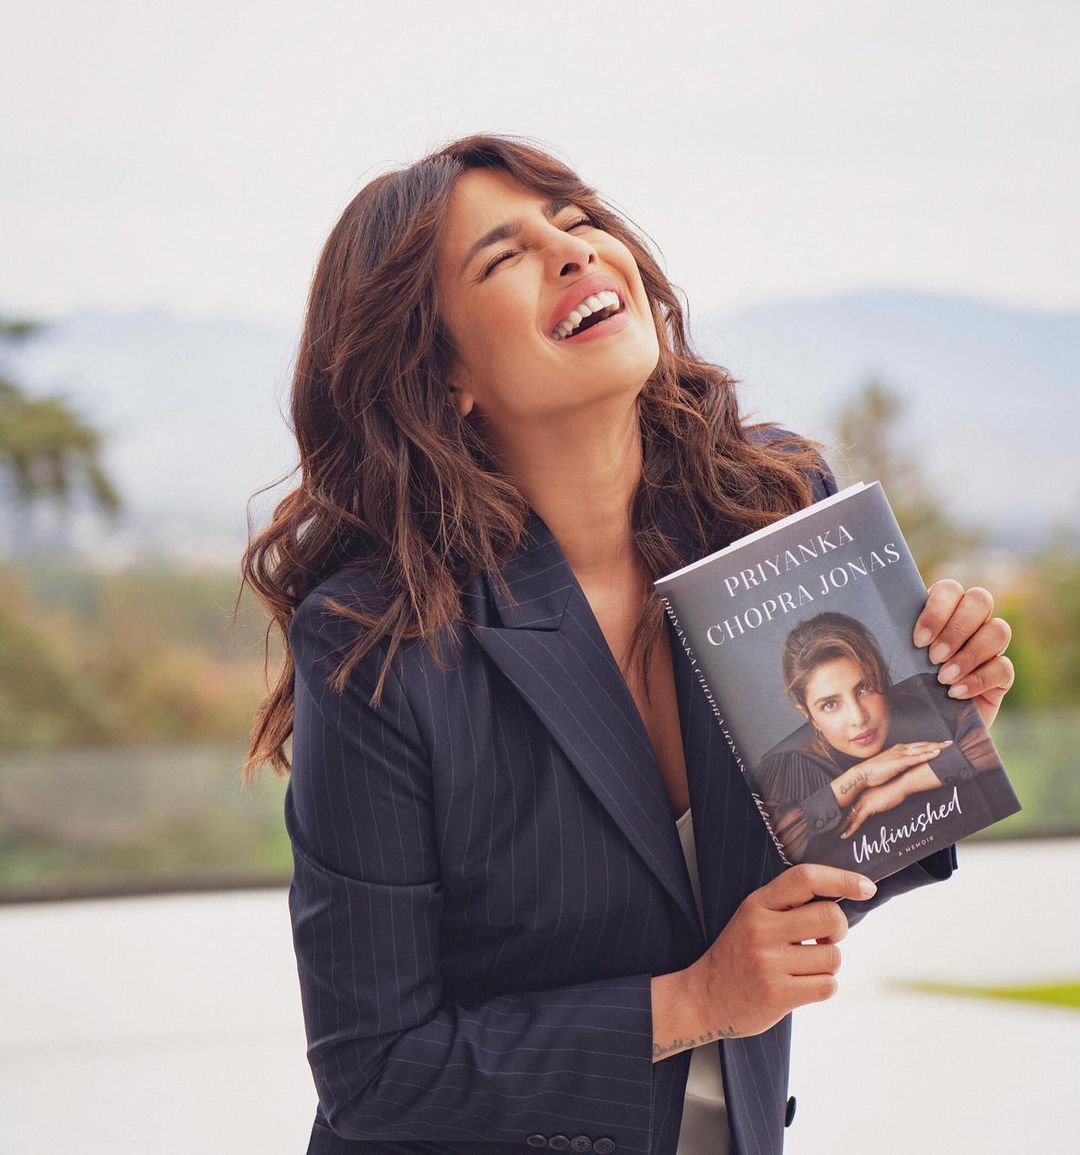 Priyanka Chopra Imagines The Feeling Of Holding Her Book 'Unfinished' For The First Time, It Looks Very Real Though